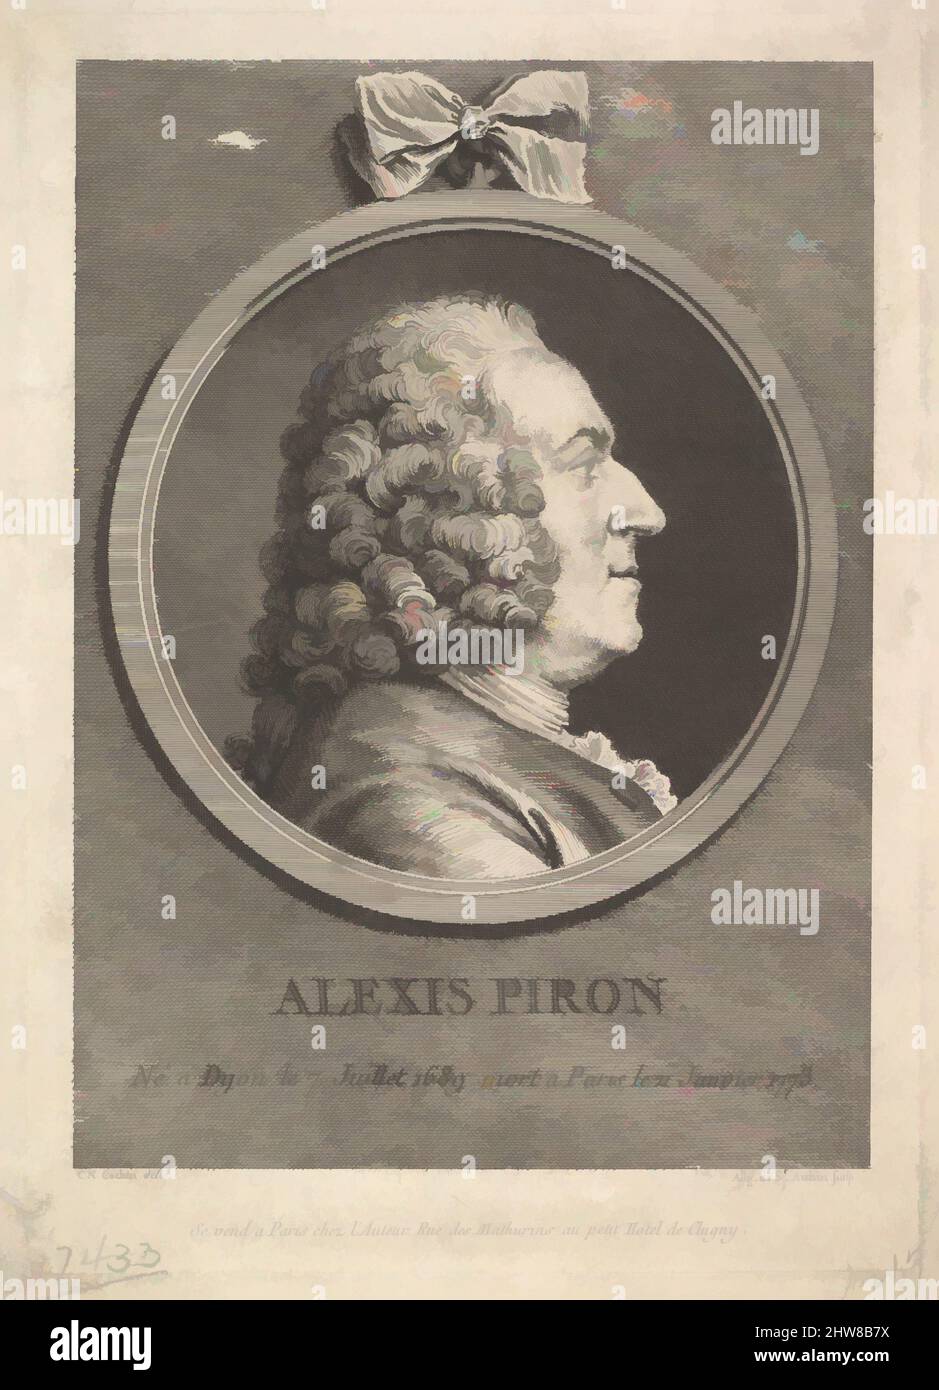 Art inspired by Portrait of Alexis Piron, 1776, Etching and engraving; fifth state of five (Bocher), Sheet: 8 3/4 × 6 9/16 in. (22.2 × 16.7 cm), Prints, Augustin de Saint-Aubin (French, Paris 1736–1807 Paris), After Charles Nicolas Cochin II (French, Paris 1715–1790 Paris, Classic works modernized by Artotop with a splash of modernity. Shapes, color and value, eye-catching visual impact on art. Emotions through freedom of artworks in a contemporary way. A timeless message pursuing a wildly creative new direction. Artists turning to the digital medium and creating the Artotop NFT Stock Photo